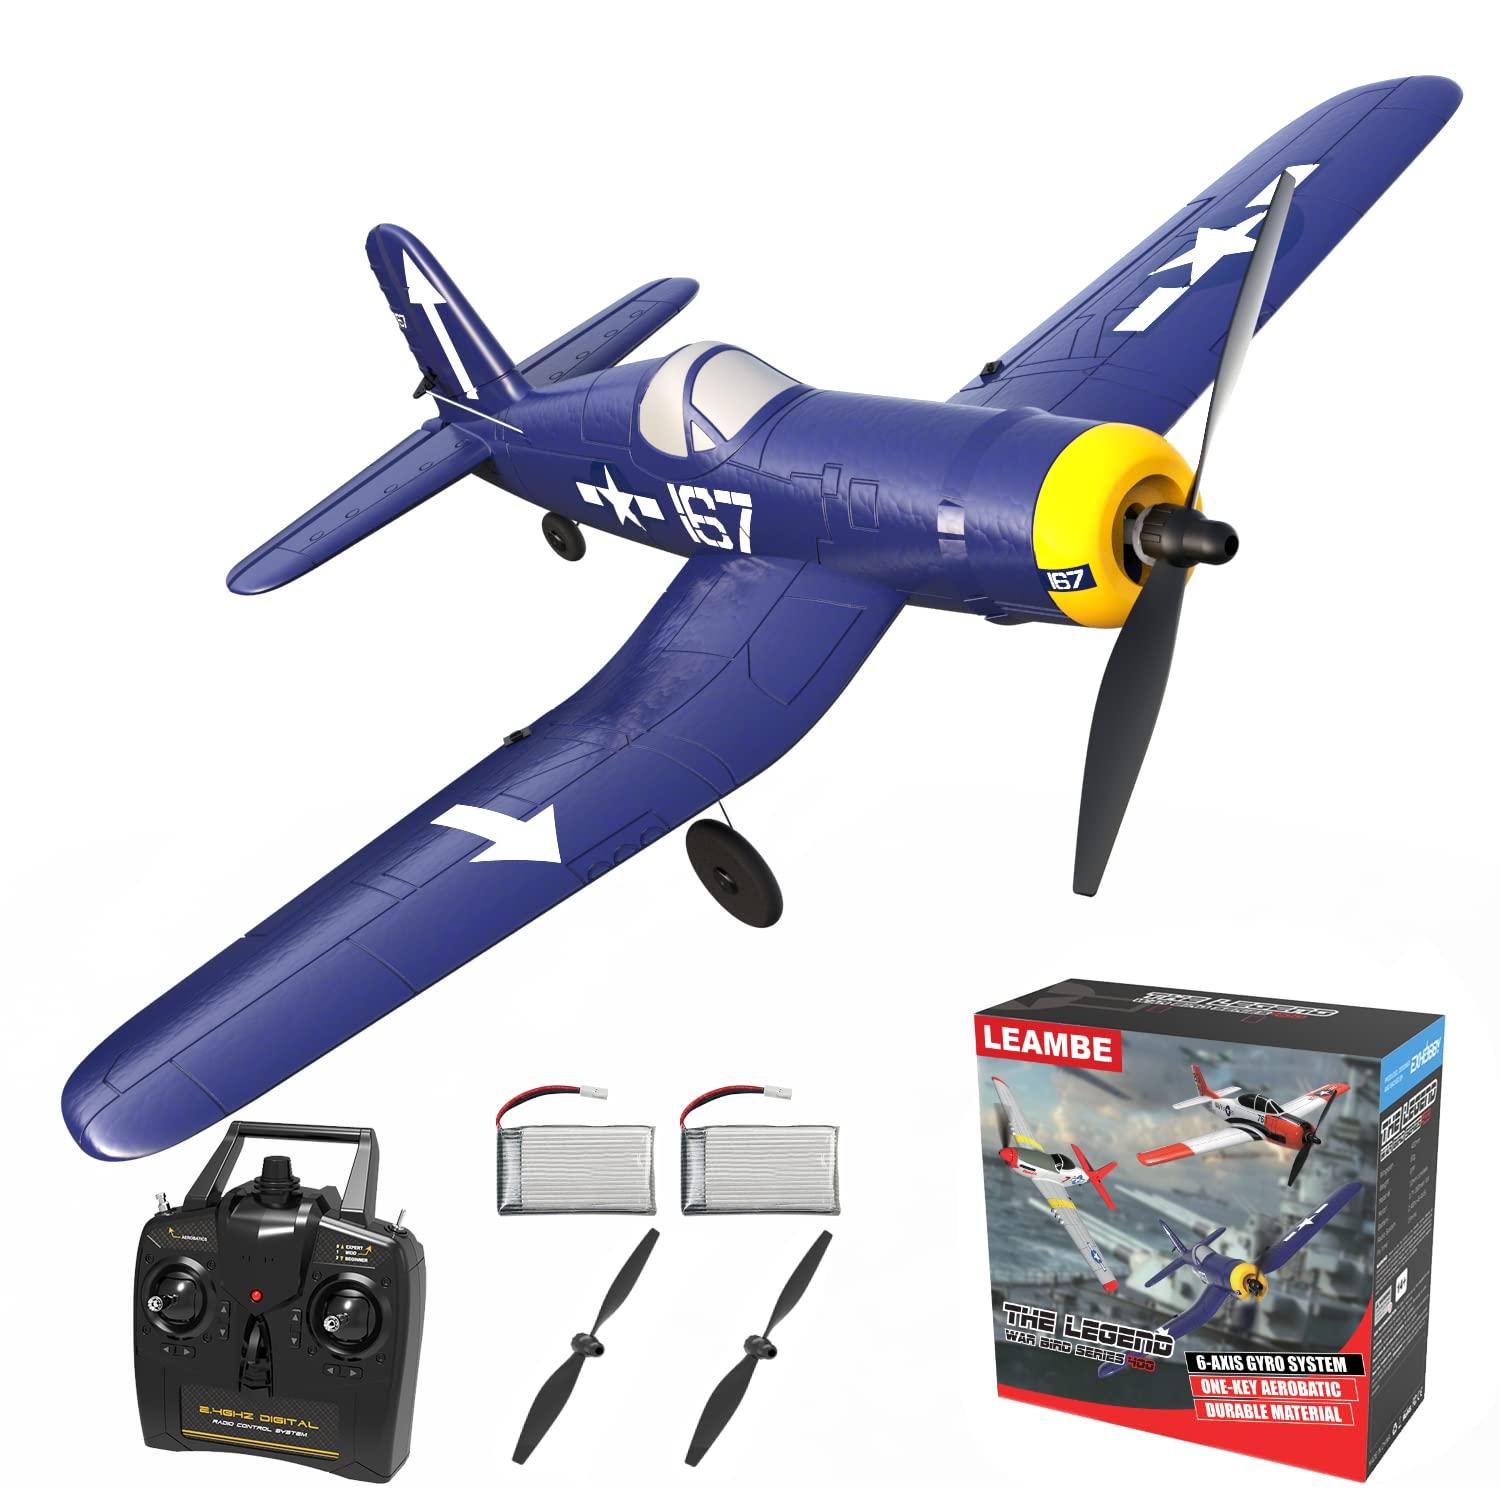 Fastest Rc Jet Airplane: Building a High-Speed RC Jet: Key Components and Essential Upgrades